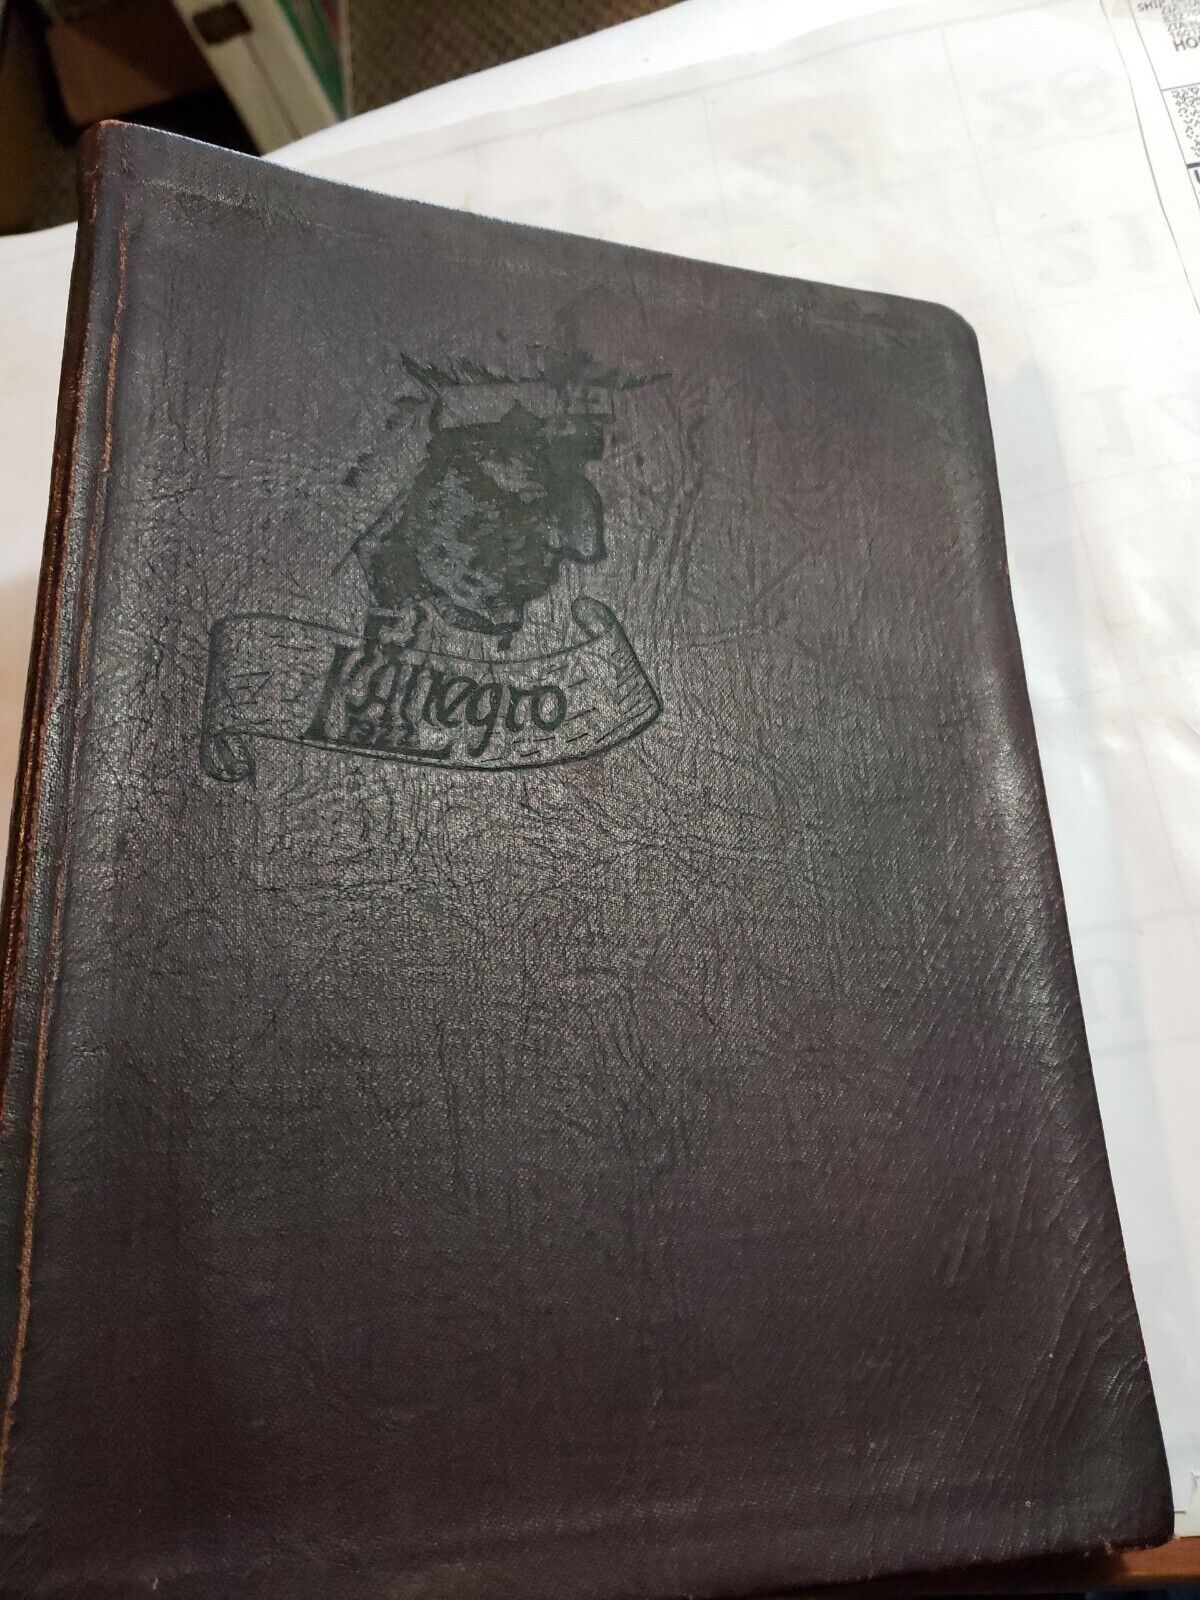 1922 Allegro Mississippi College Yearbook, Clinton Mississippi￼